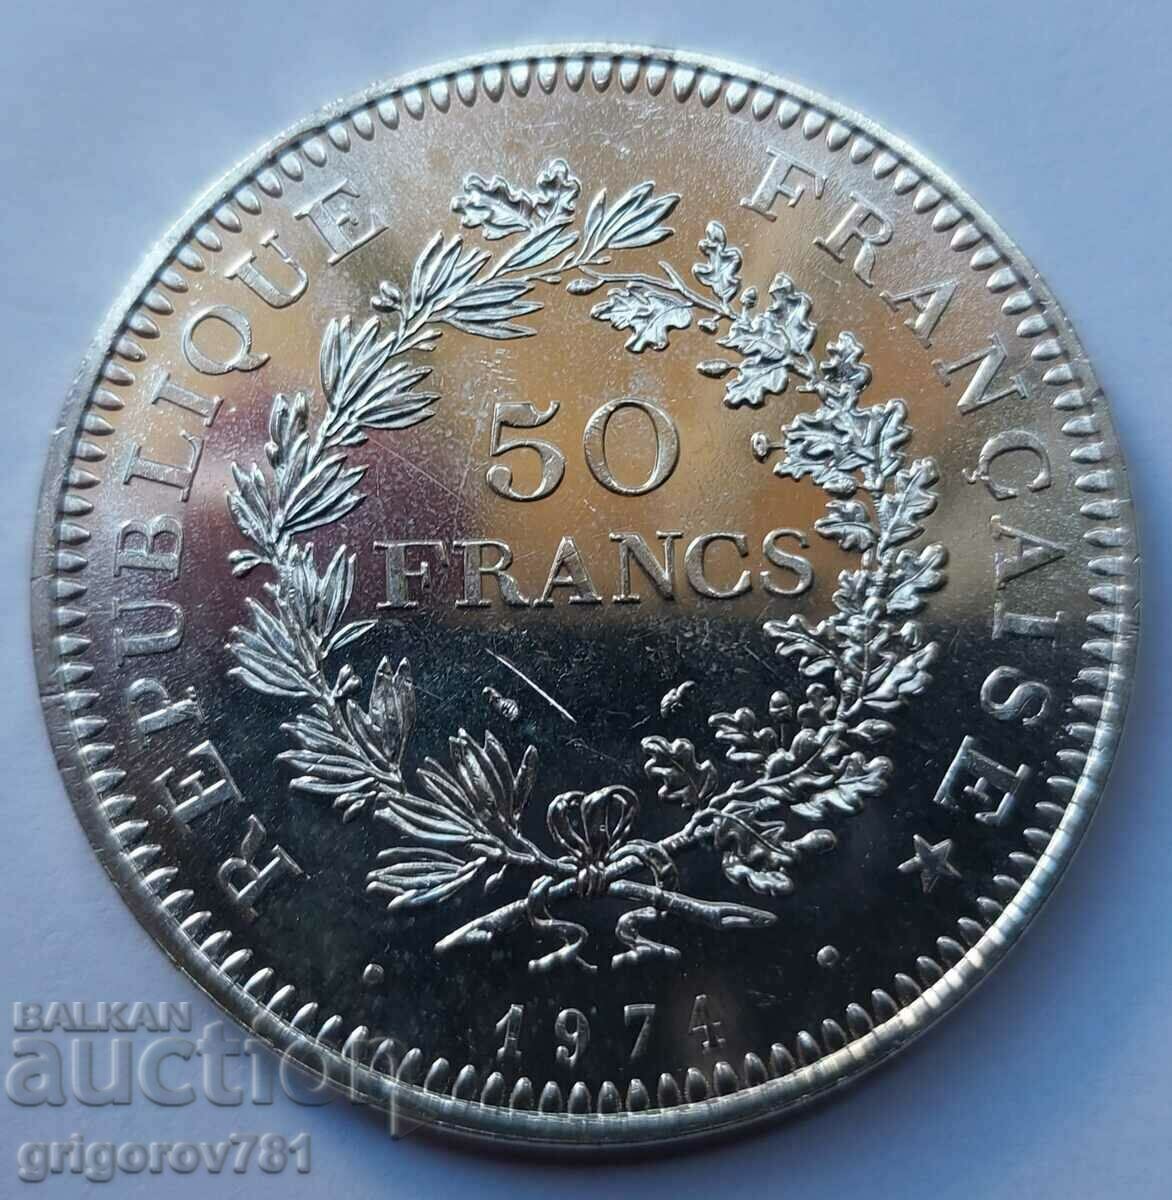 50 Francs Silver France 1974 - Silver Coin #7